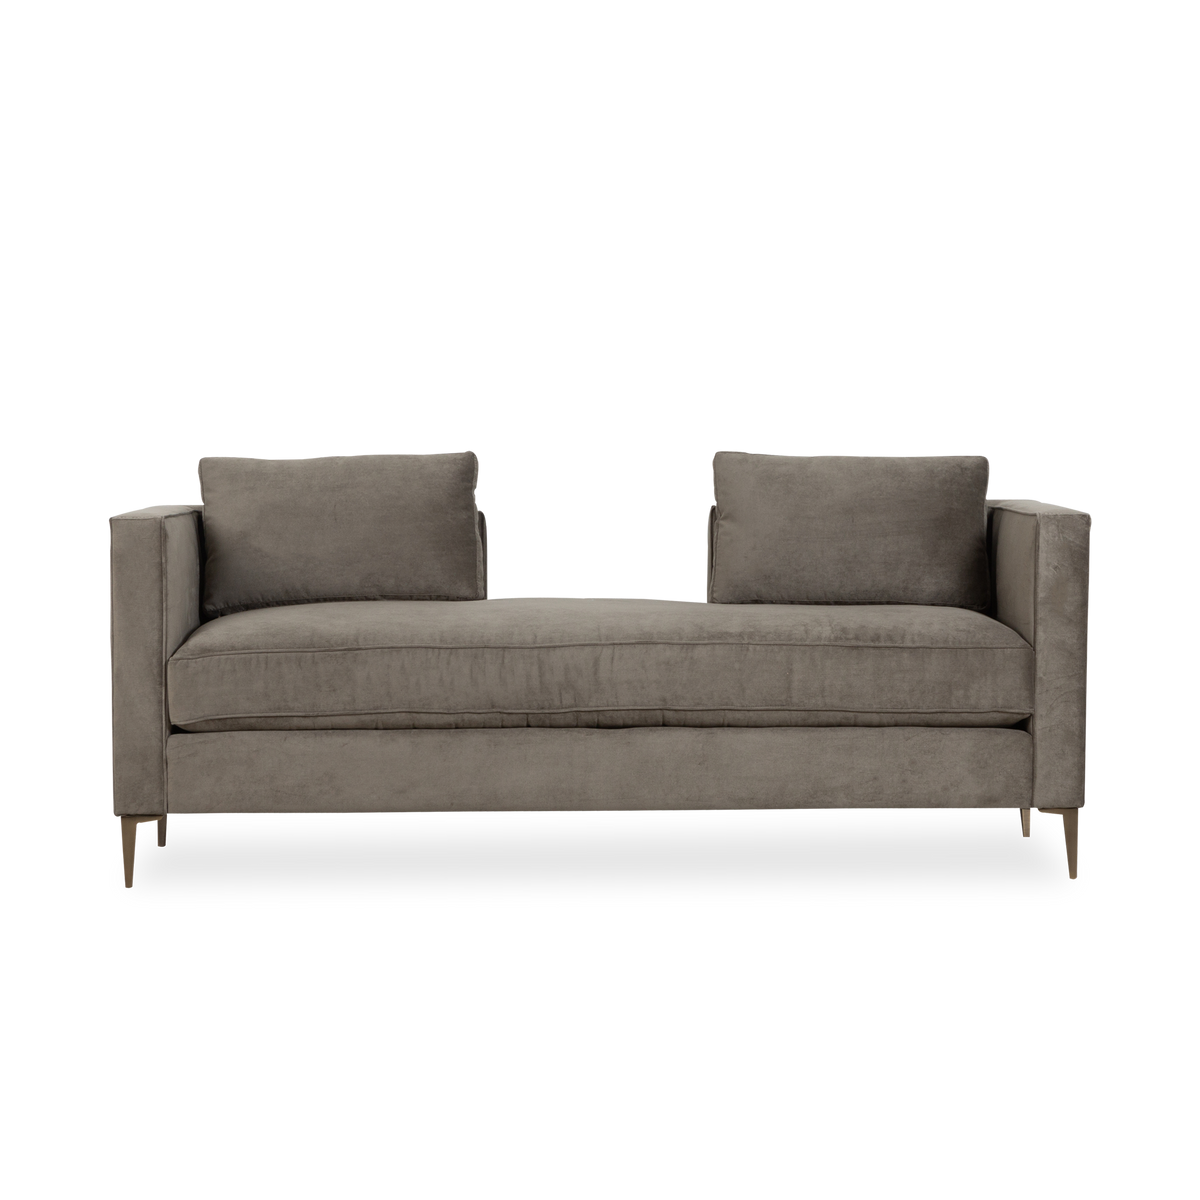 Perfect for entertaining, the Belgrove Settee offers a stylish accent for any space.